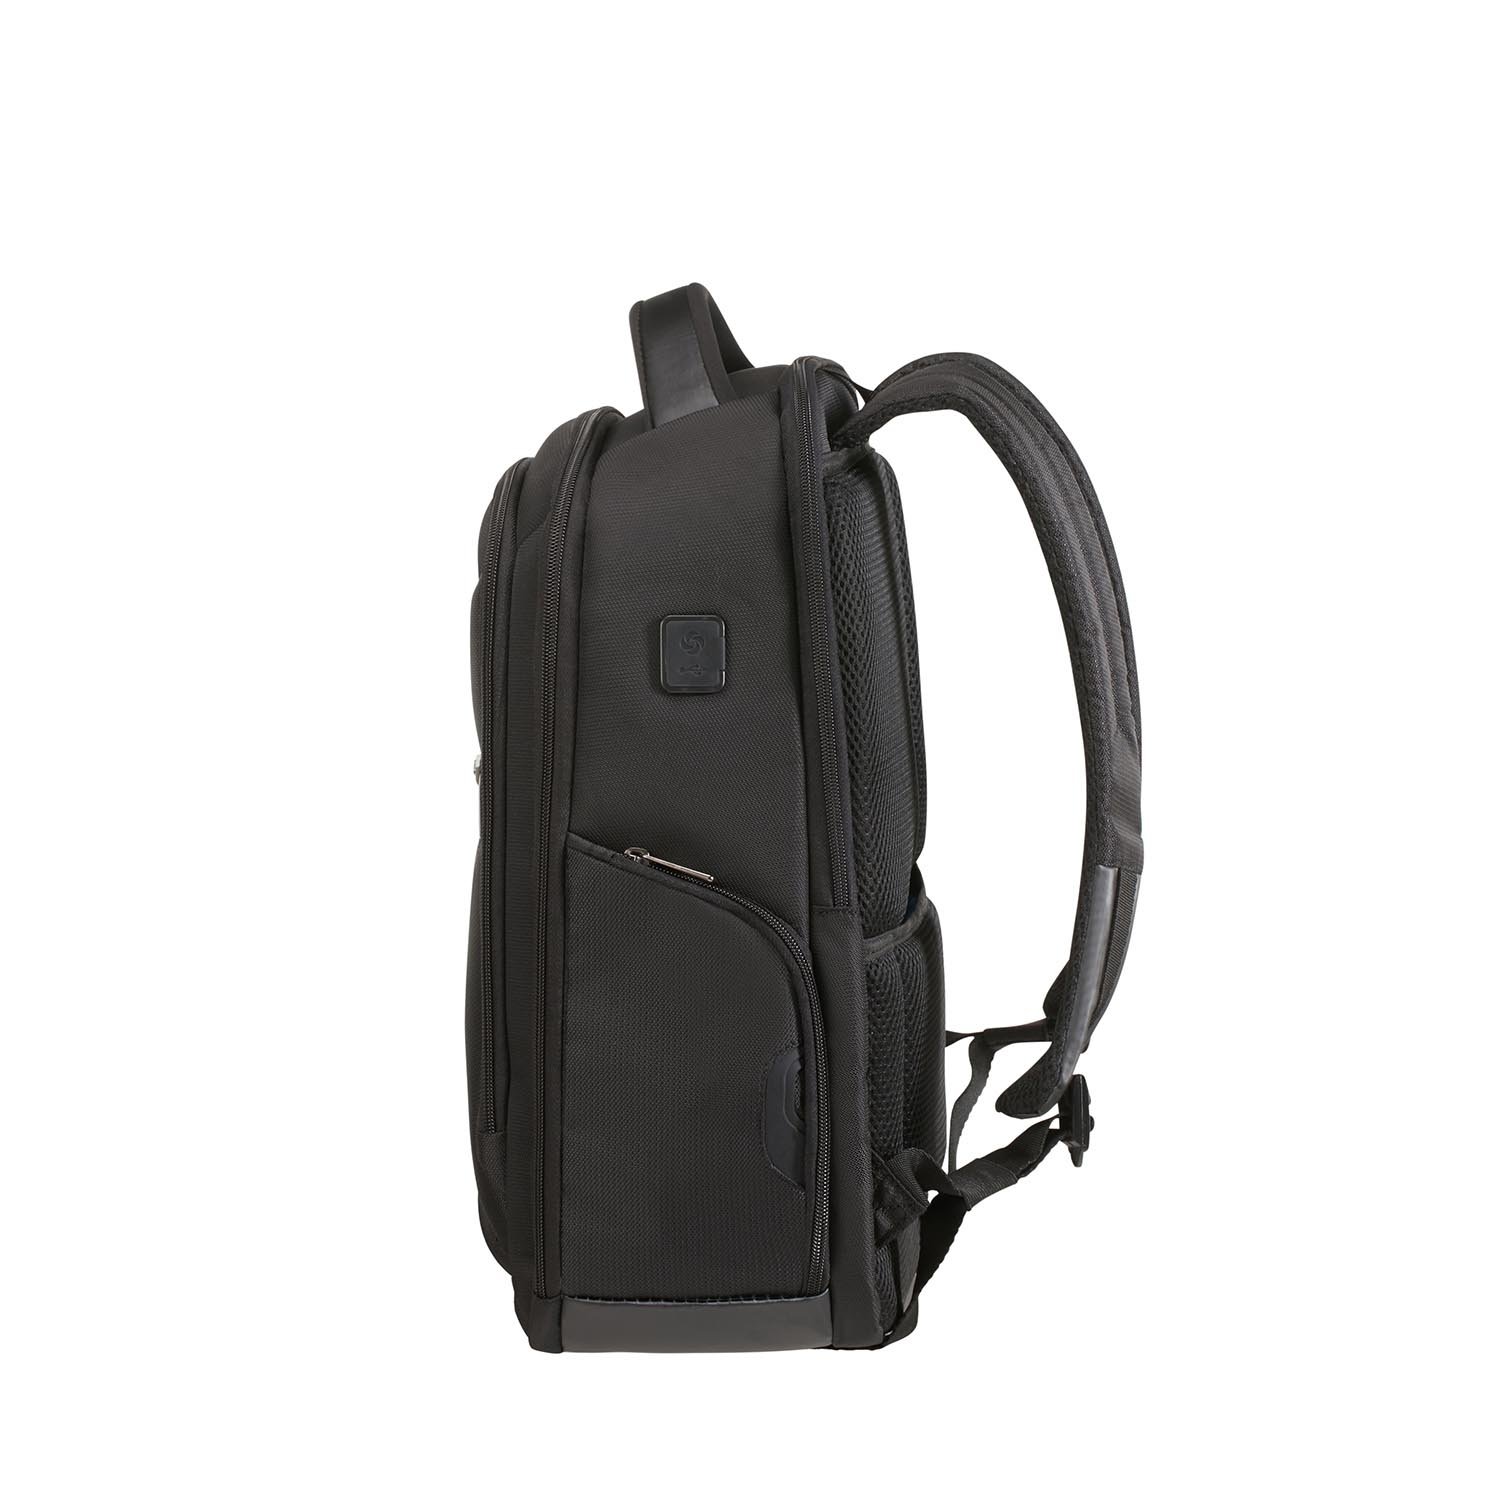 VECTURA EVO-LAPT.BACKPACK 15.6" SCS3-009-SF000*09